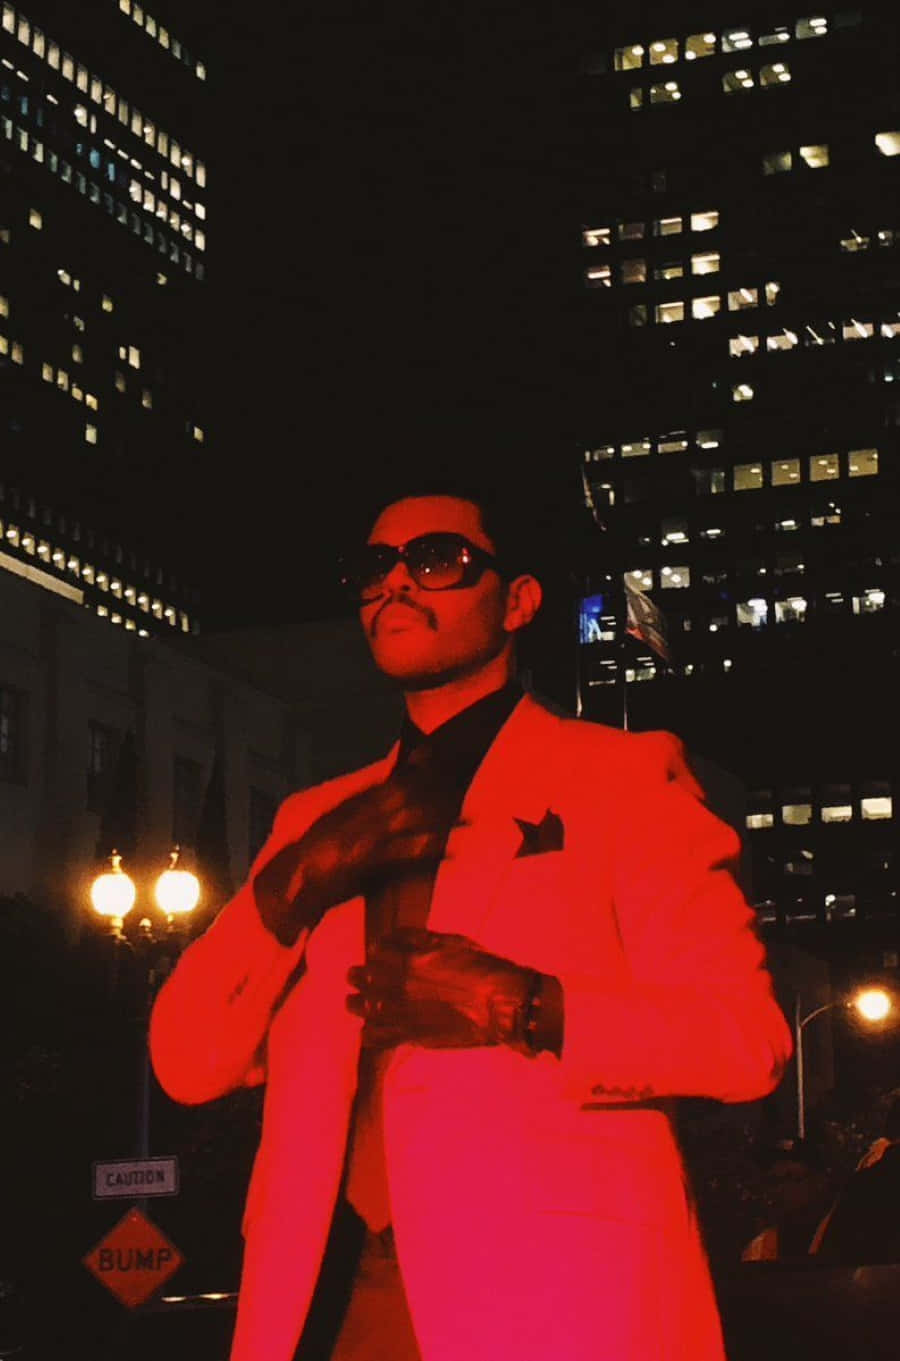 The Weeknd posing in red suit during the After Hours era Wallpaper